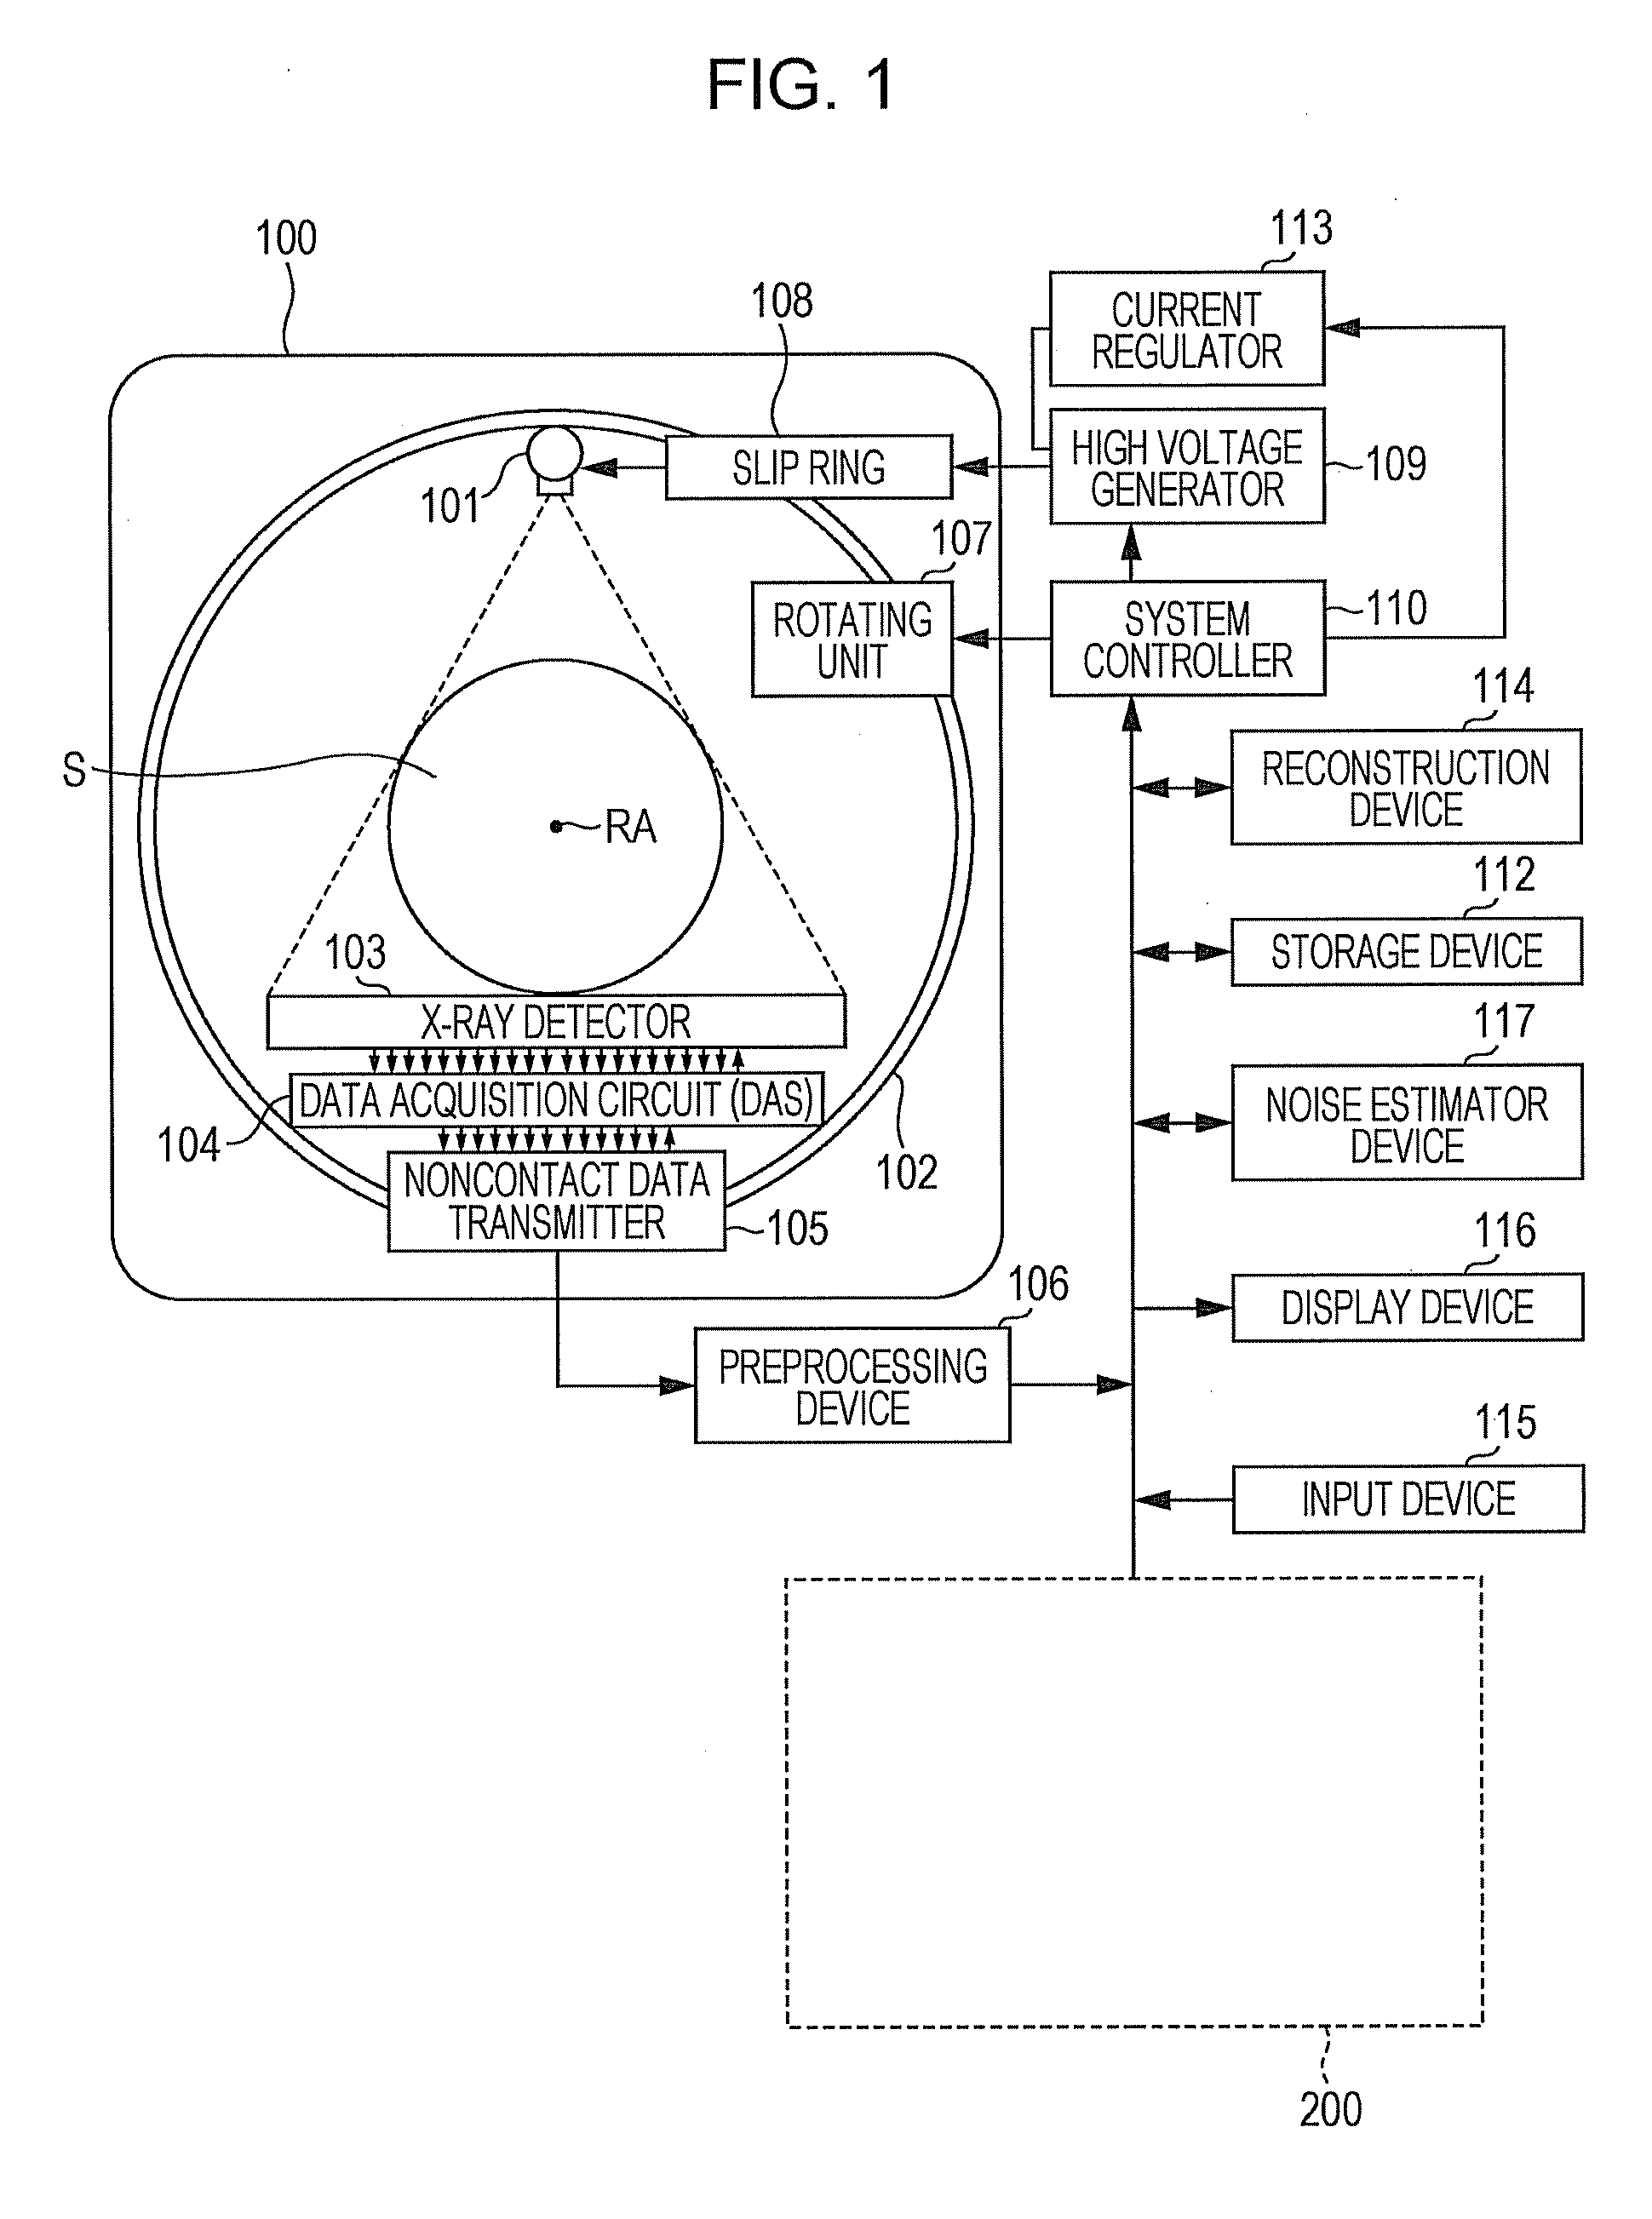 Method and system for estimating noise level